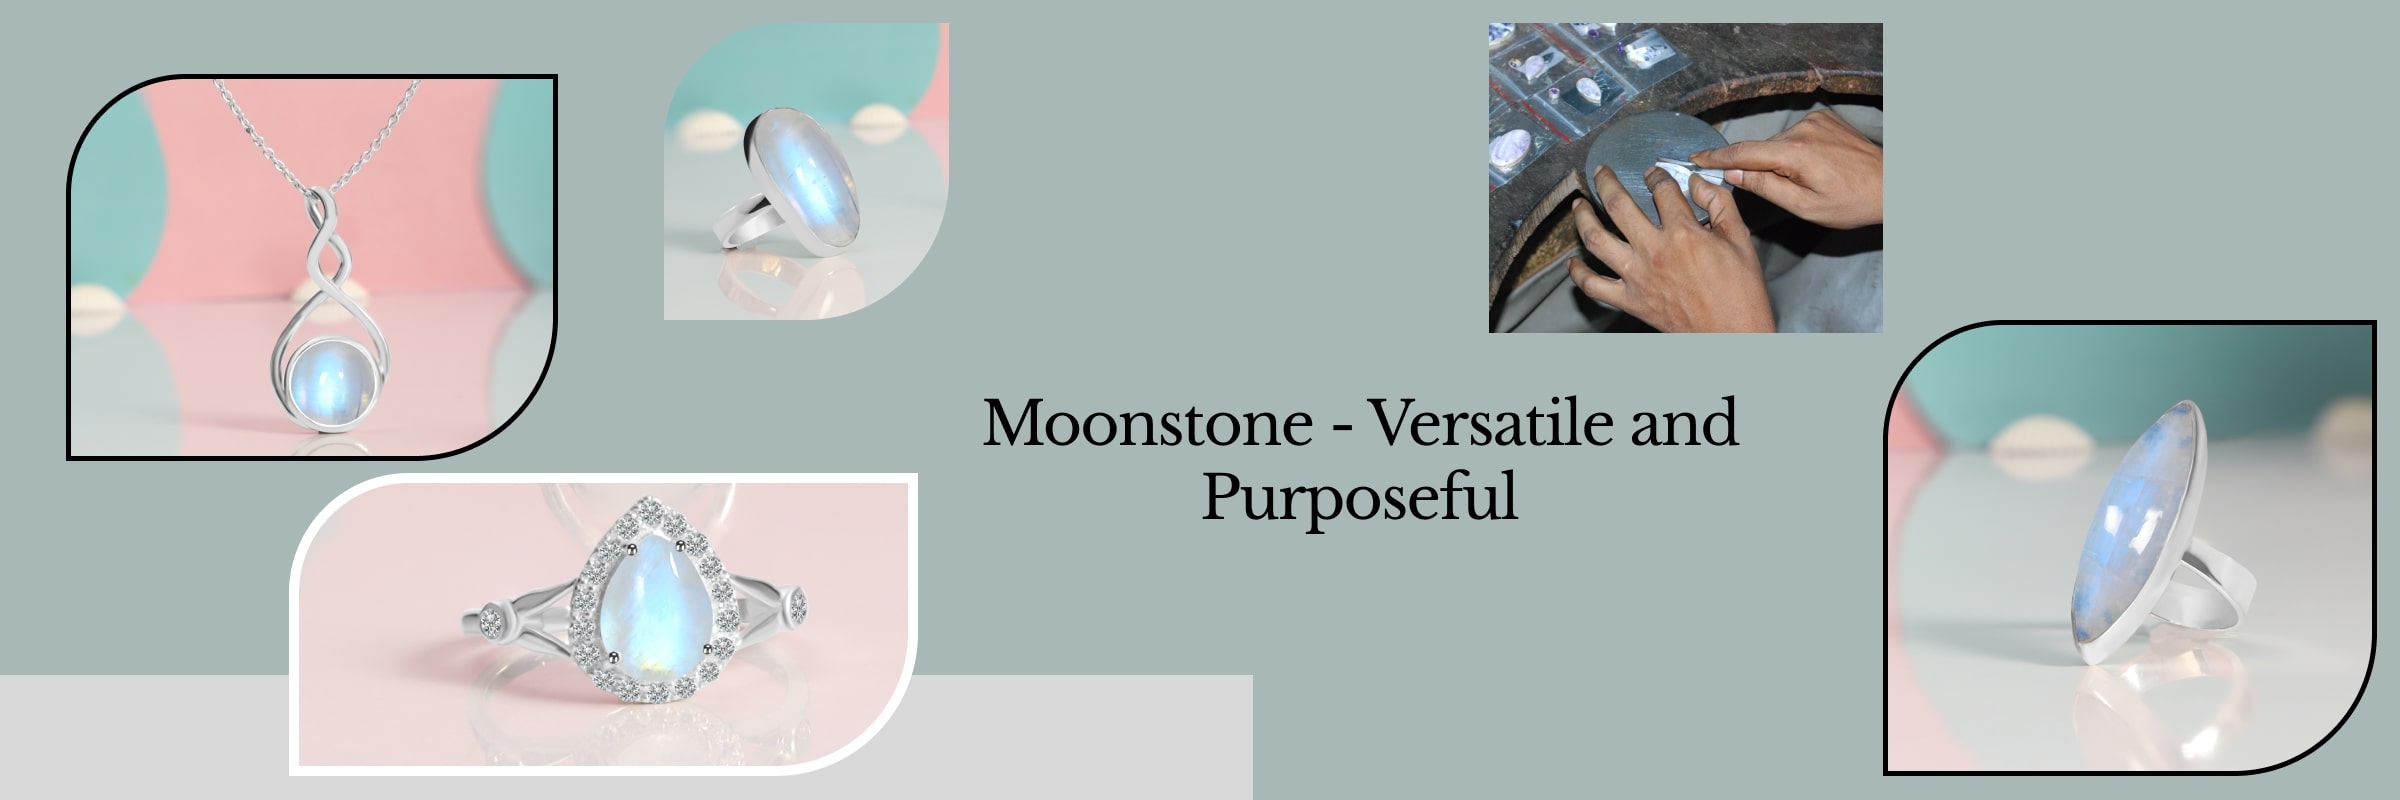 Uses of Moonstone